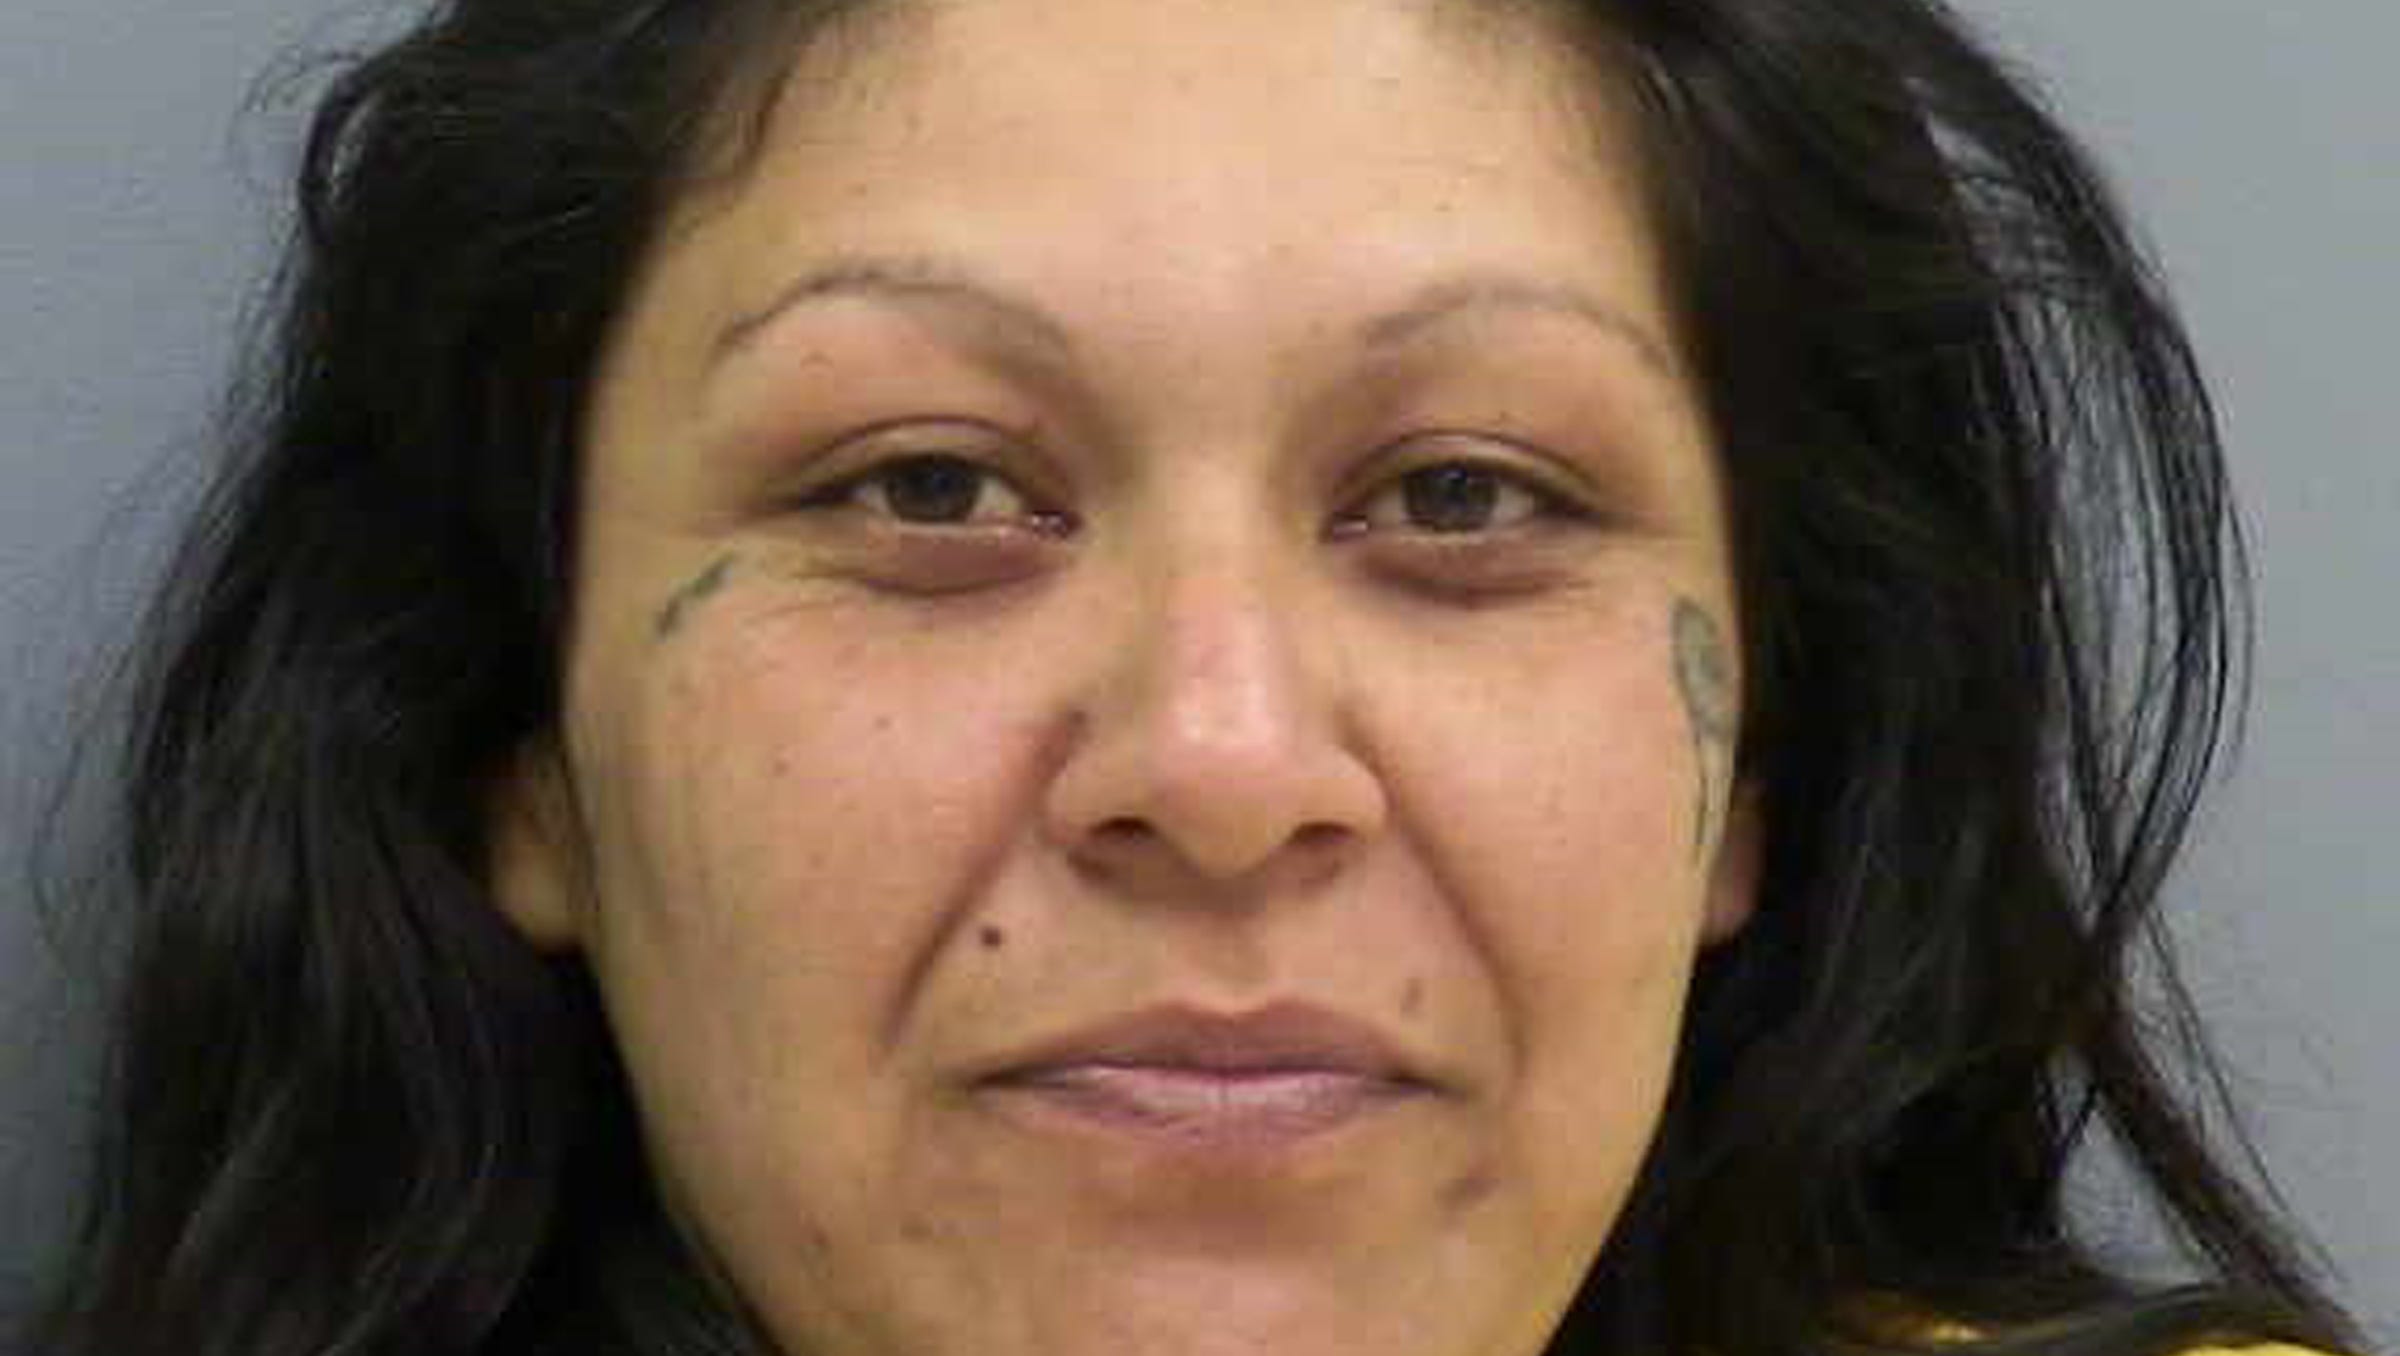 Trial for New Mexico mom in son incest case moved to 2017 pic